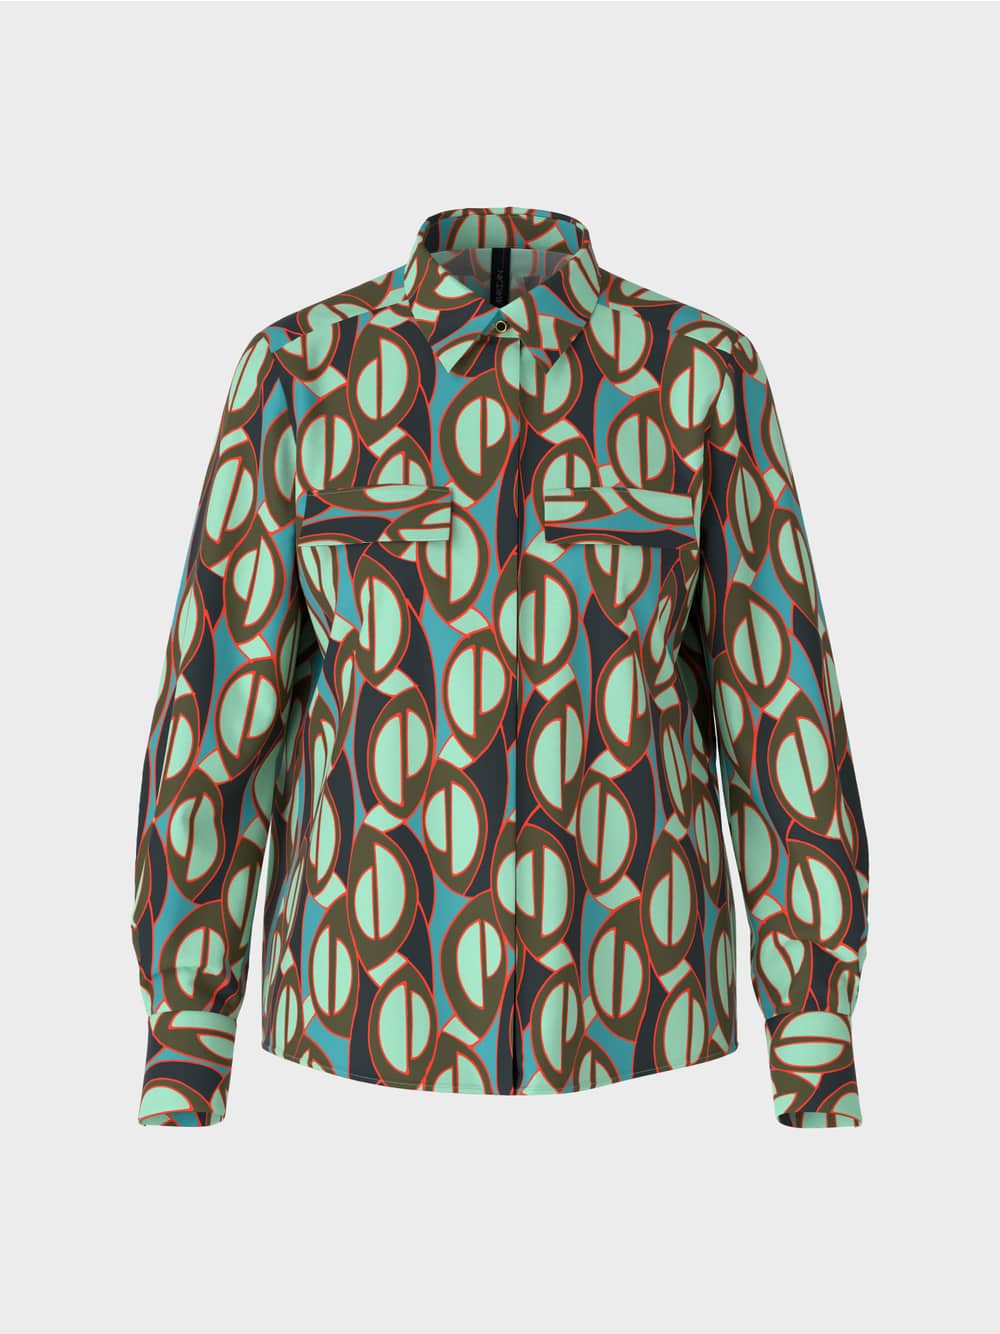 Colorful Patterned Shirt Blouse in Soft Malachite